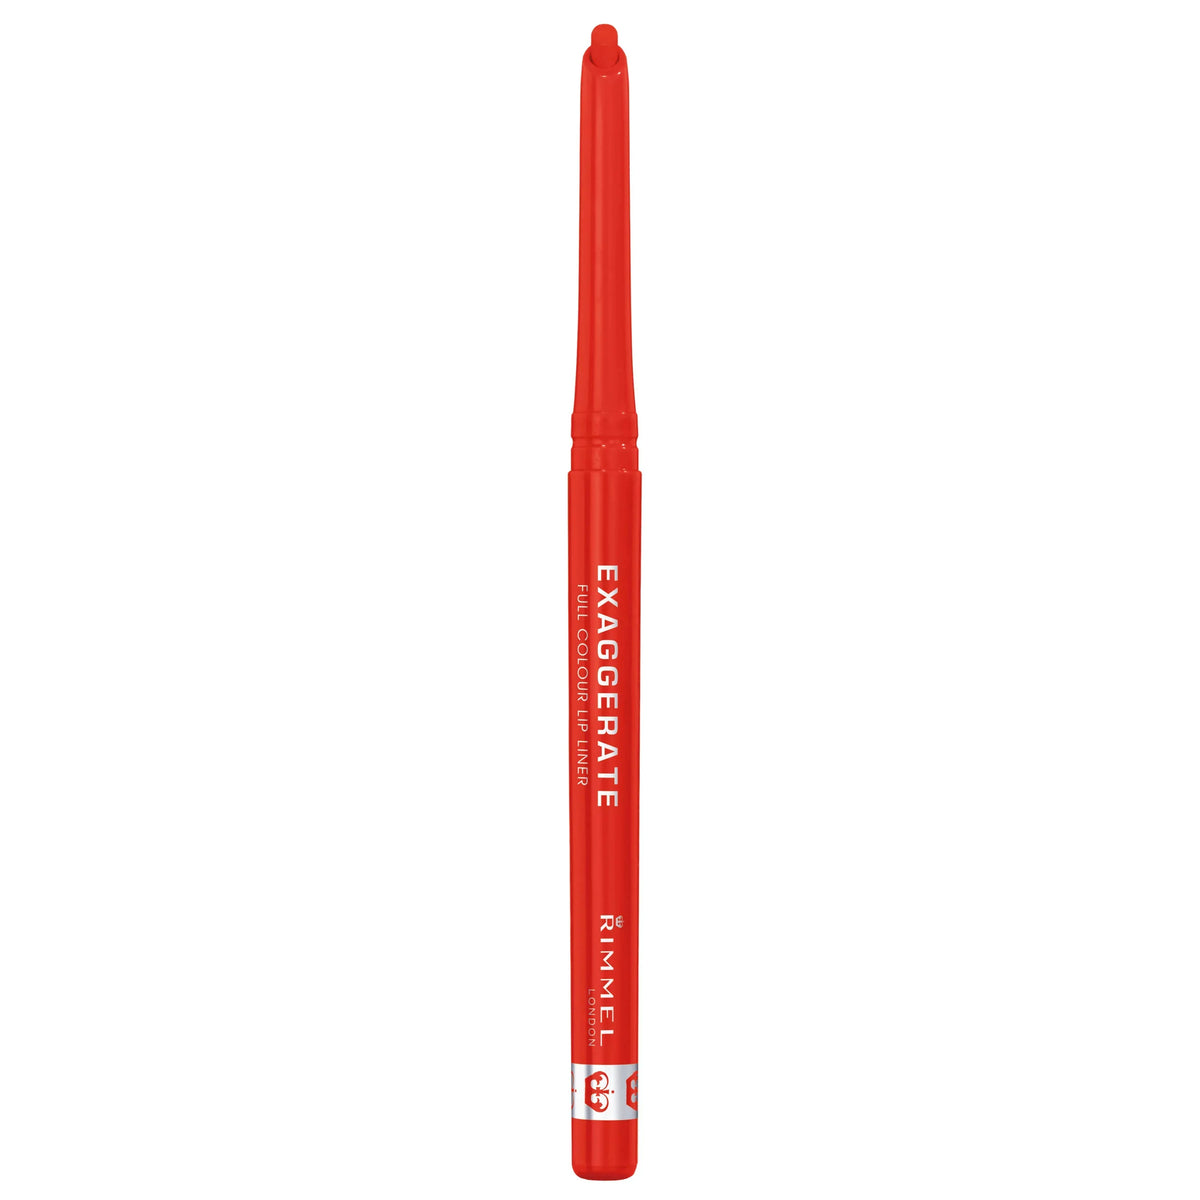 Rimmel Exaggerate Automatic Lip Liner Call Me Crazy A Bright Red Shade